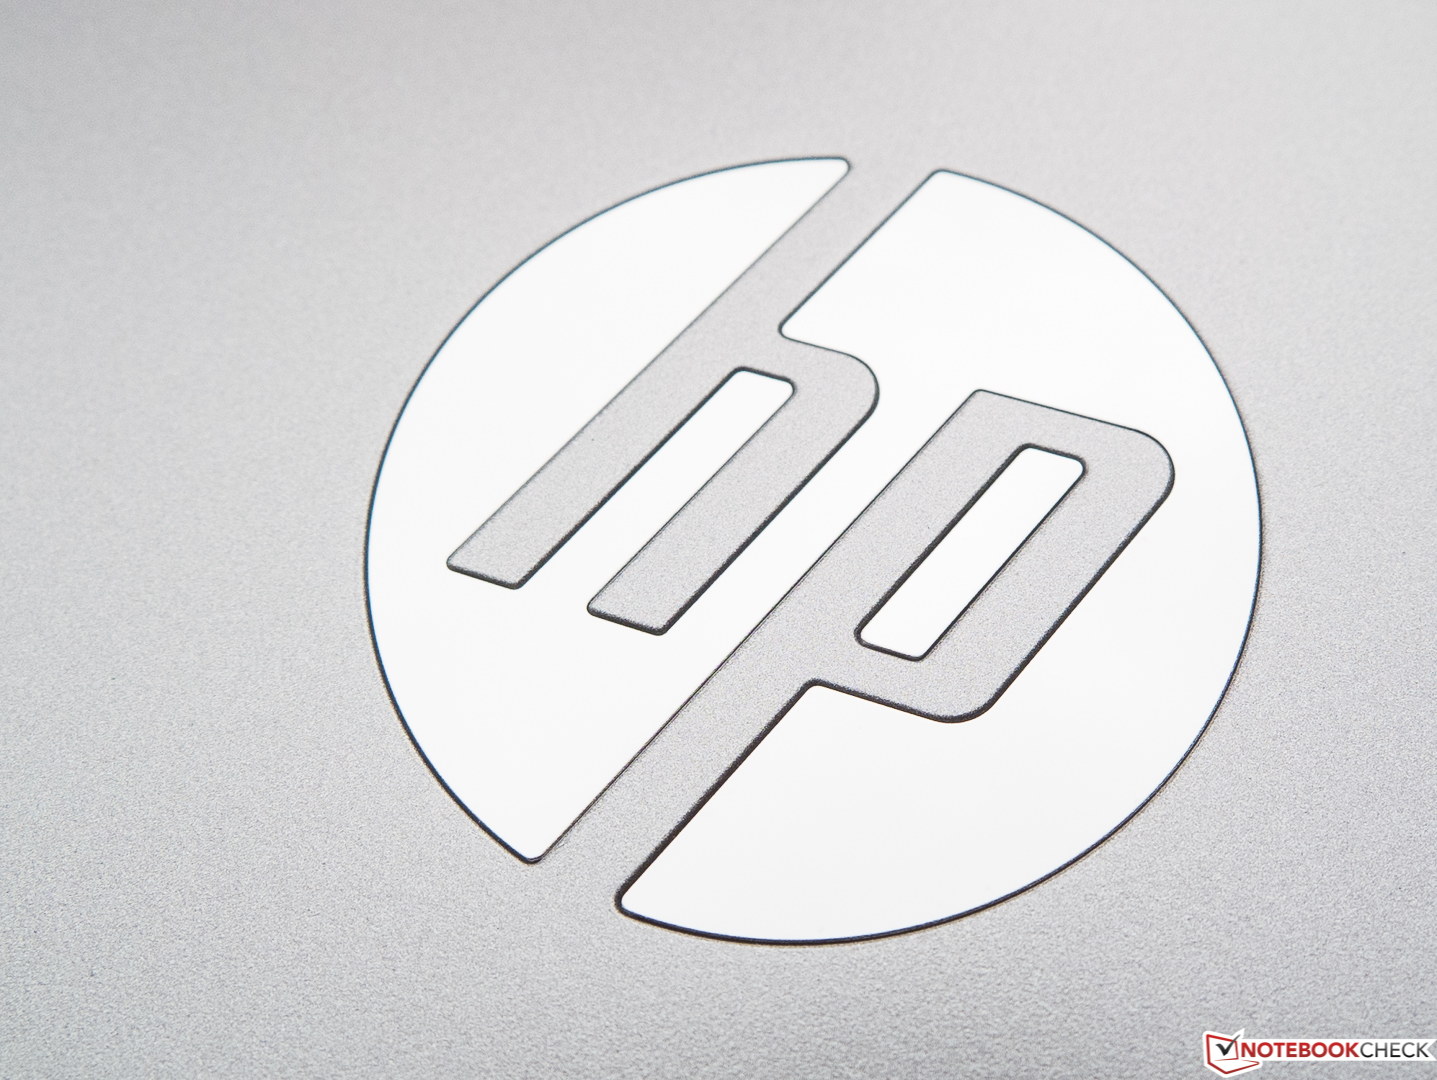 Recensione breve del notebook HP Envy 15-k010ng - Notebookcheck.it